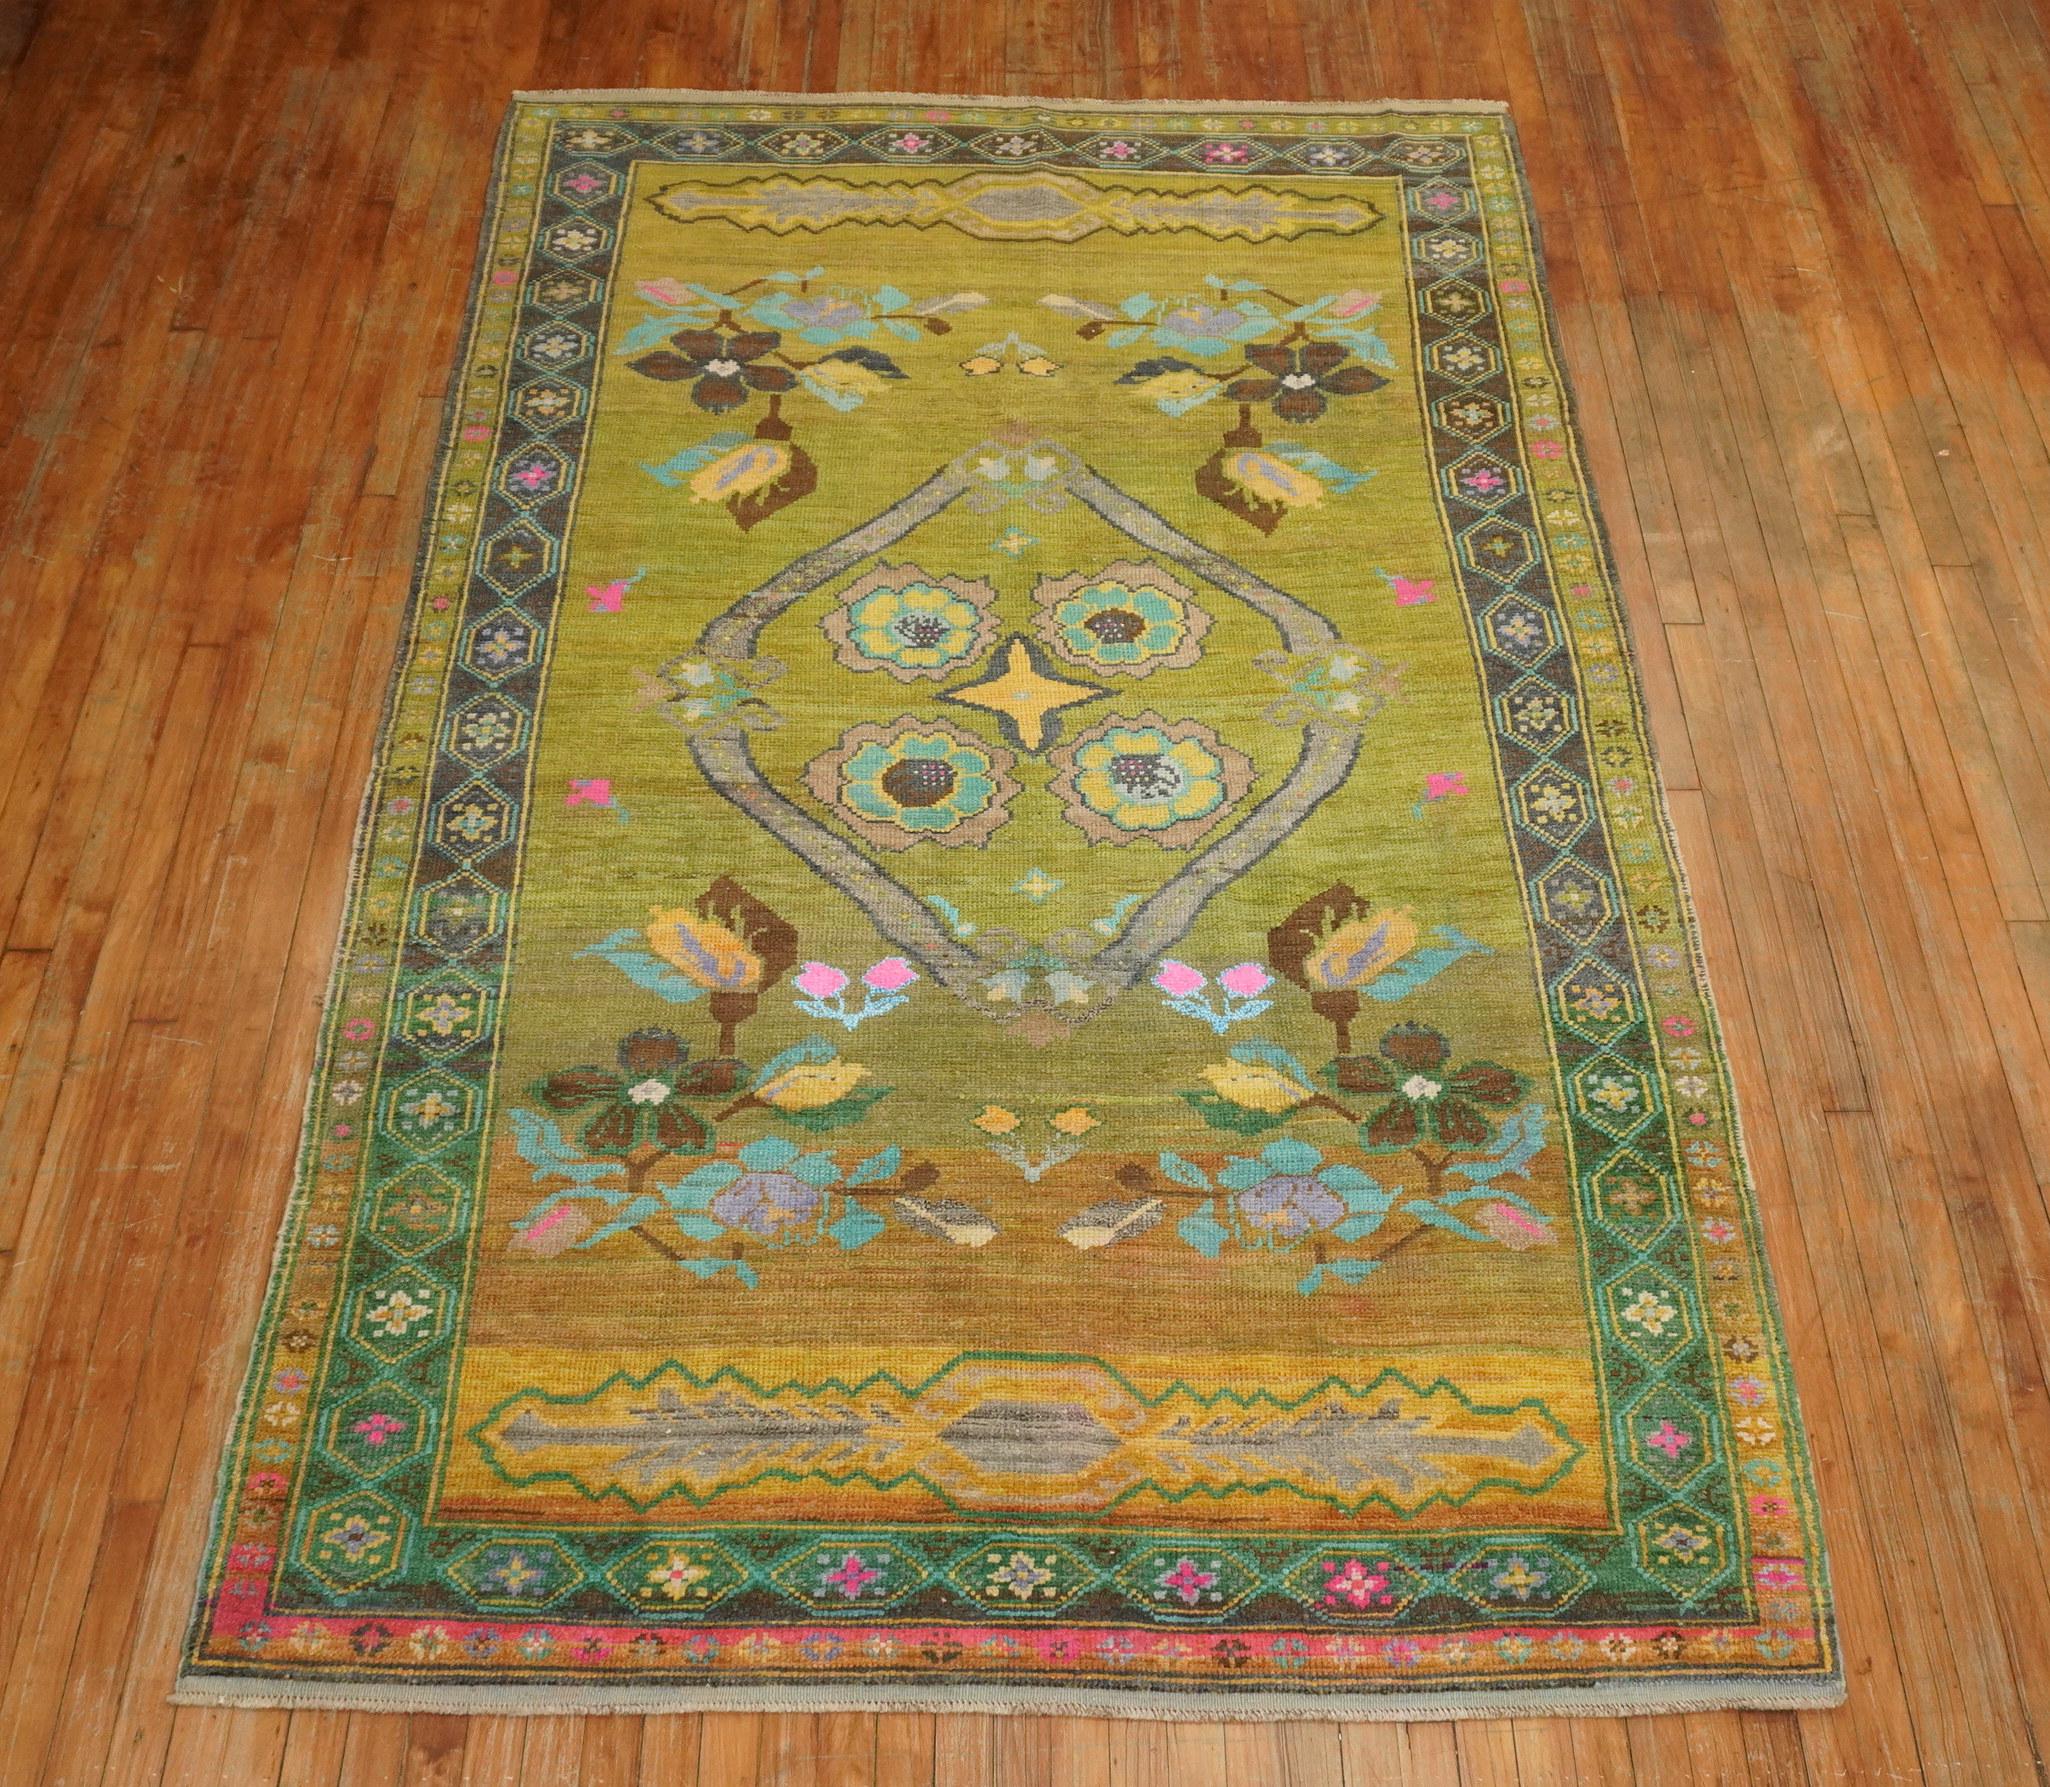 Colorful mid-20th century floral Turkish Anatolian rug. The field is a mossy green color, accents in bright blue, yellow, brown and hot pink,

circa mid-20th century. Measures: 5'7